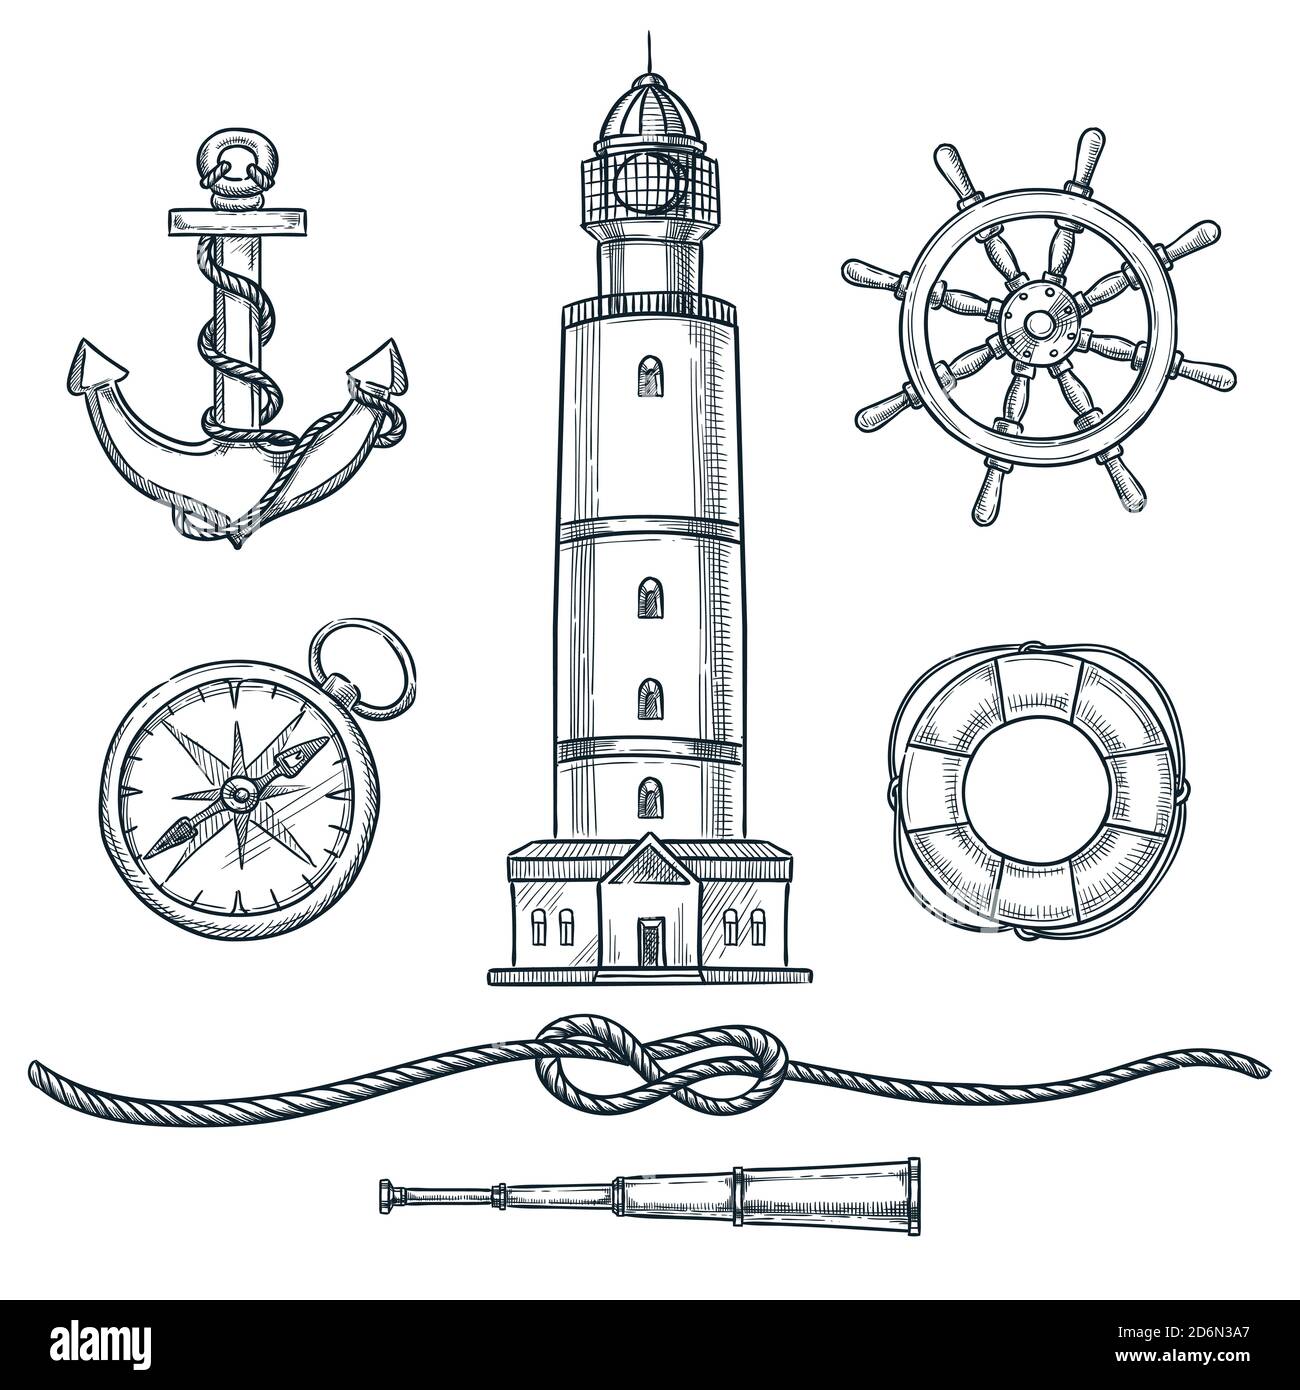 Summer nautical vintage icons set. Vector hand drawn sketch illustration. Sea and marine design elements isolated on white background. Stock Vector